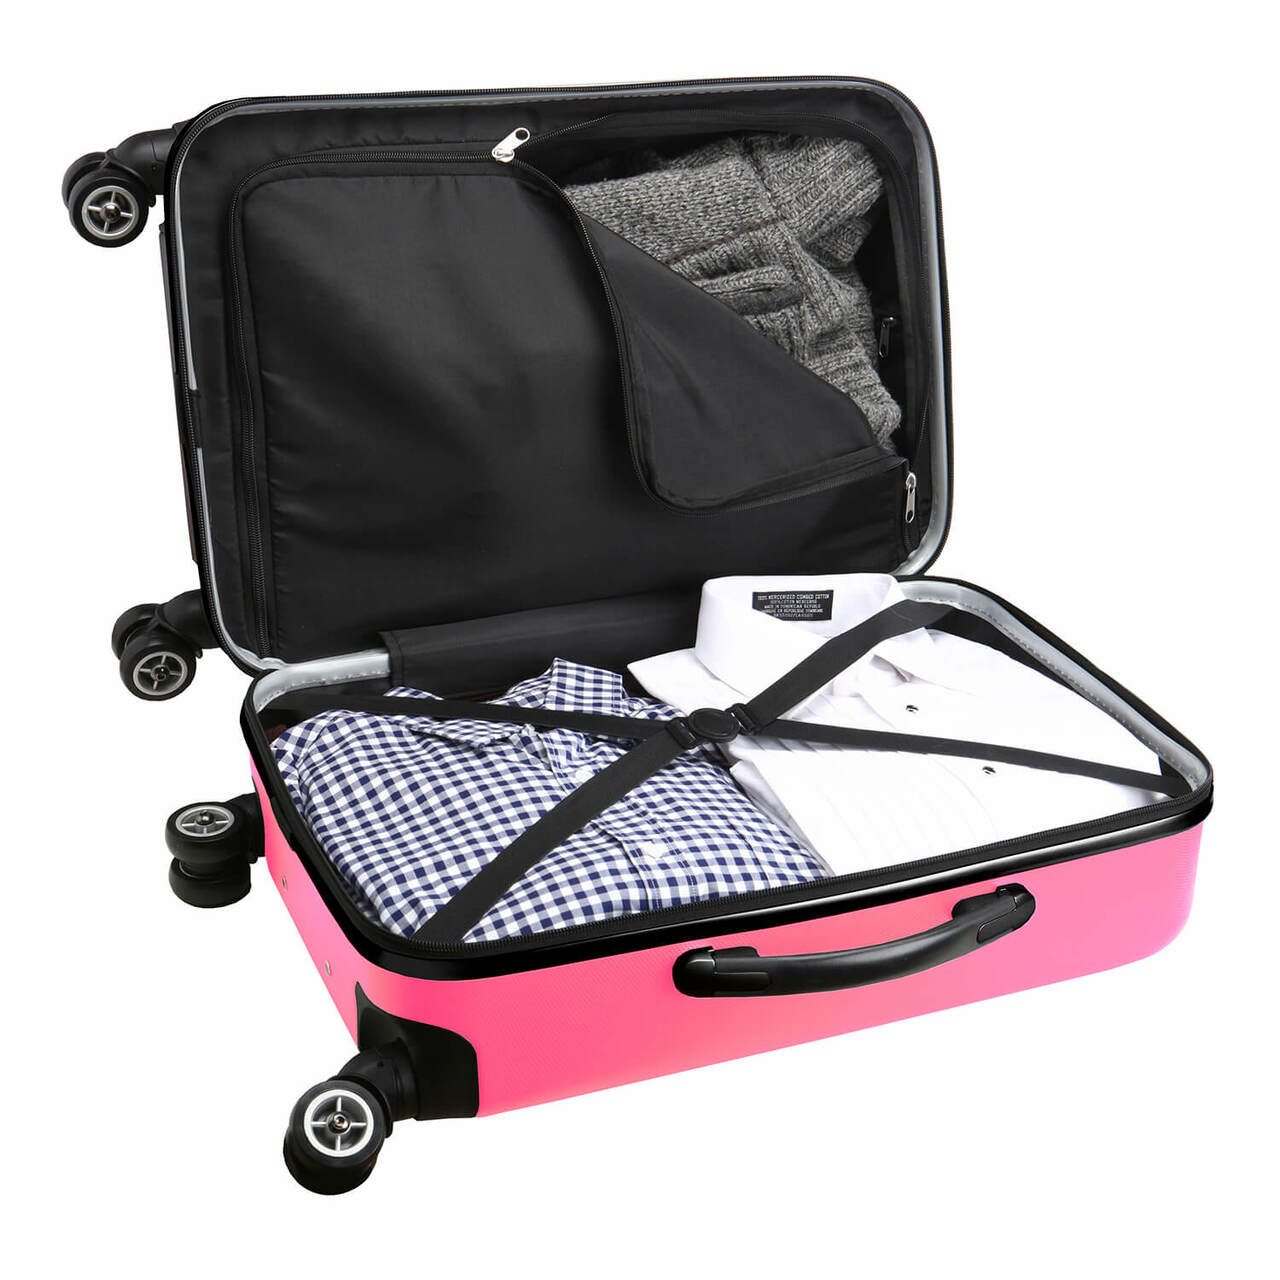 Auburn Tigers 20" Pink Domestic Carry-on Spinner